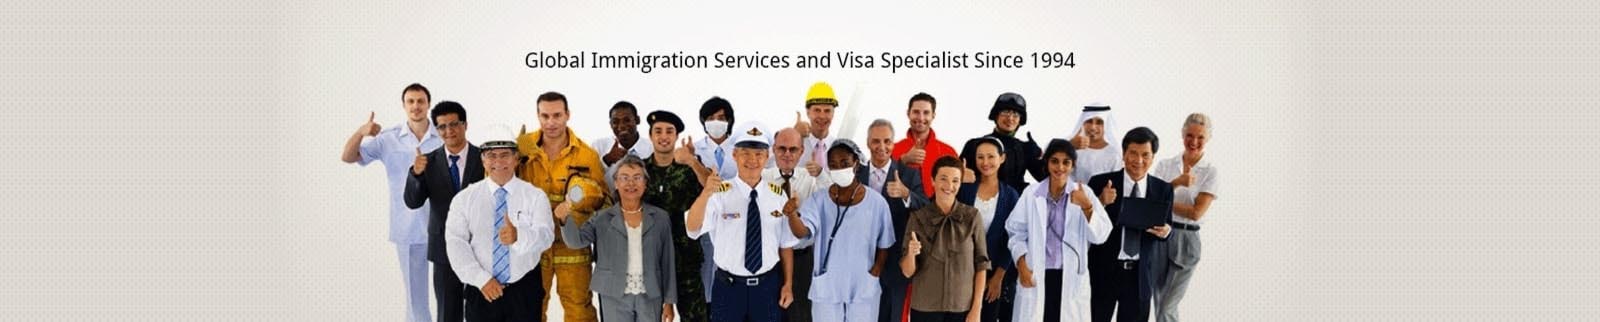 worldwide immigration services